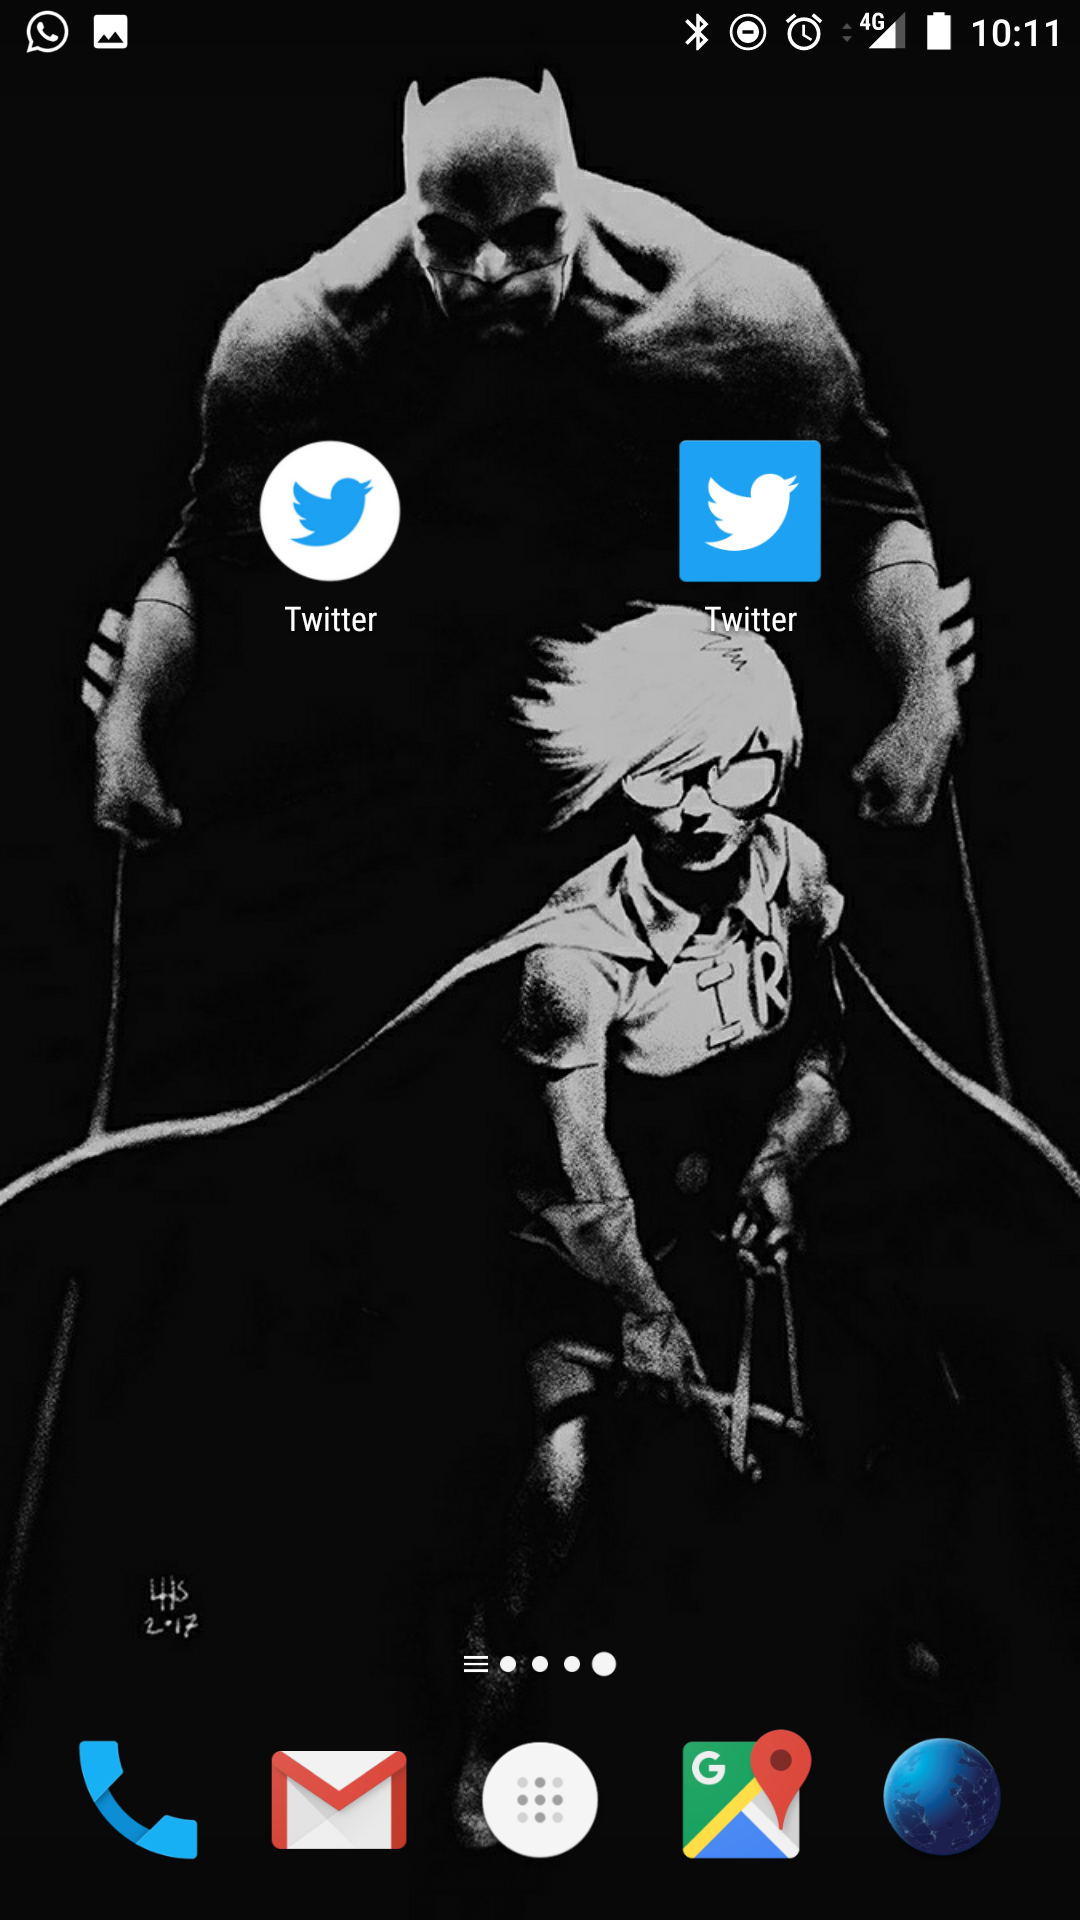 Twitter Home Screen icons